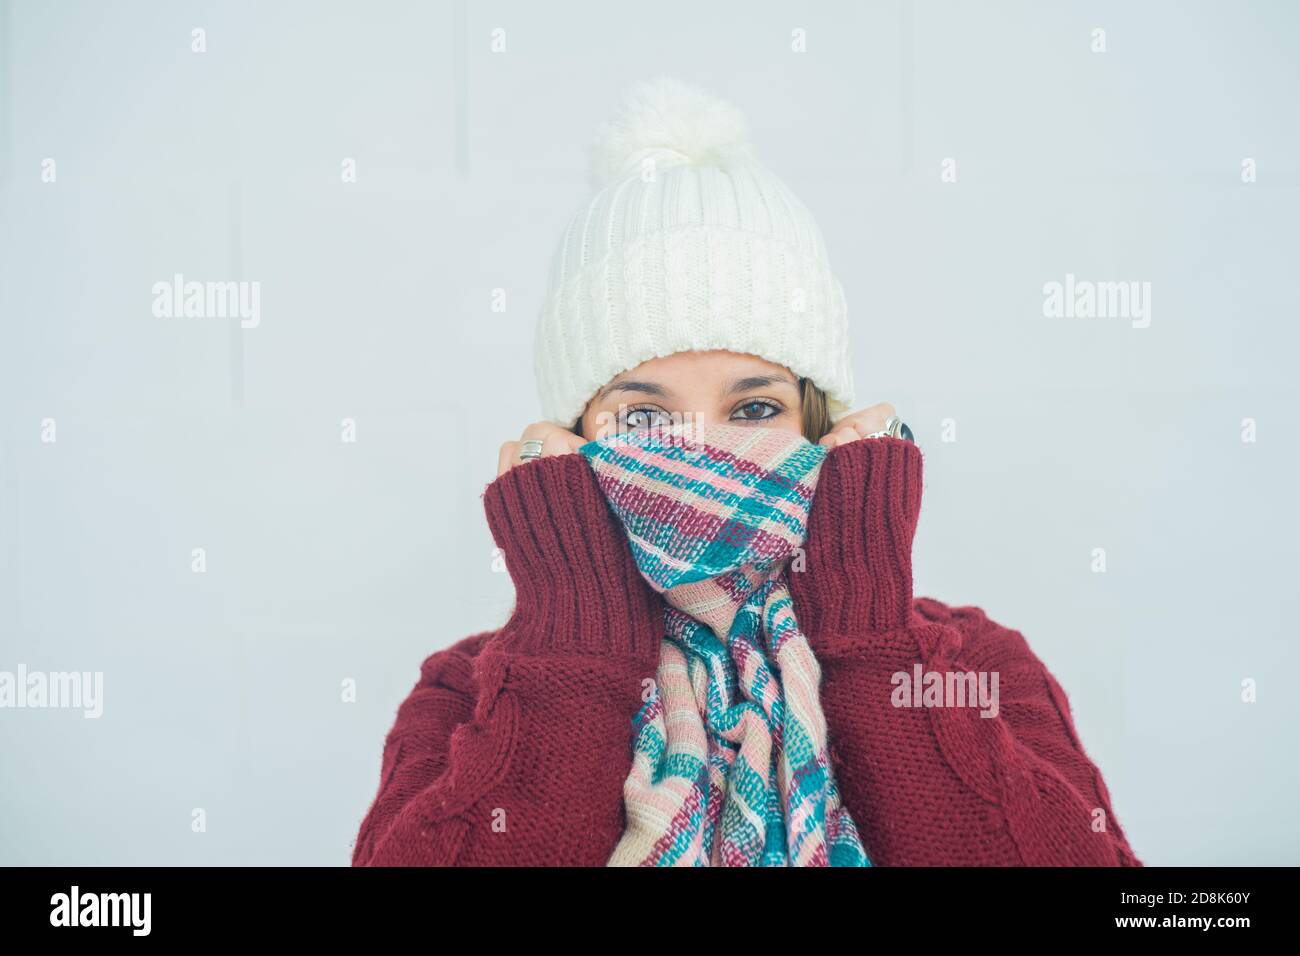 Closeup shot of a girl with her face wrapped up in a scarf on white background Stock Photo